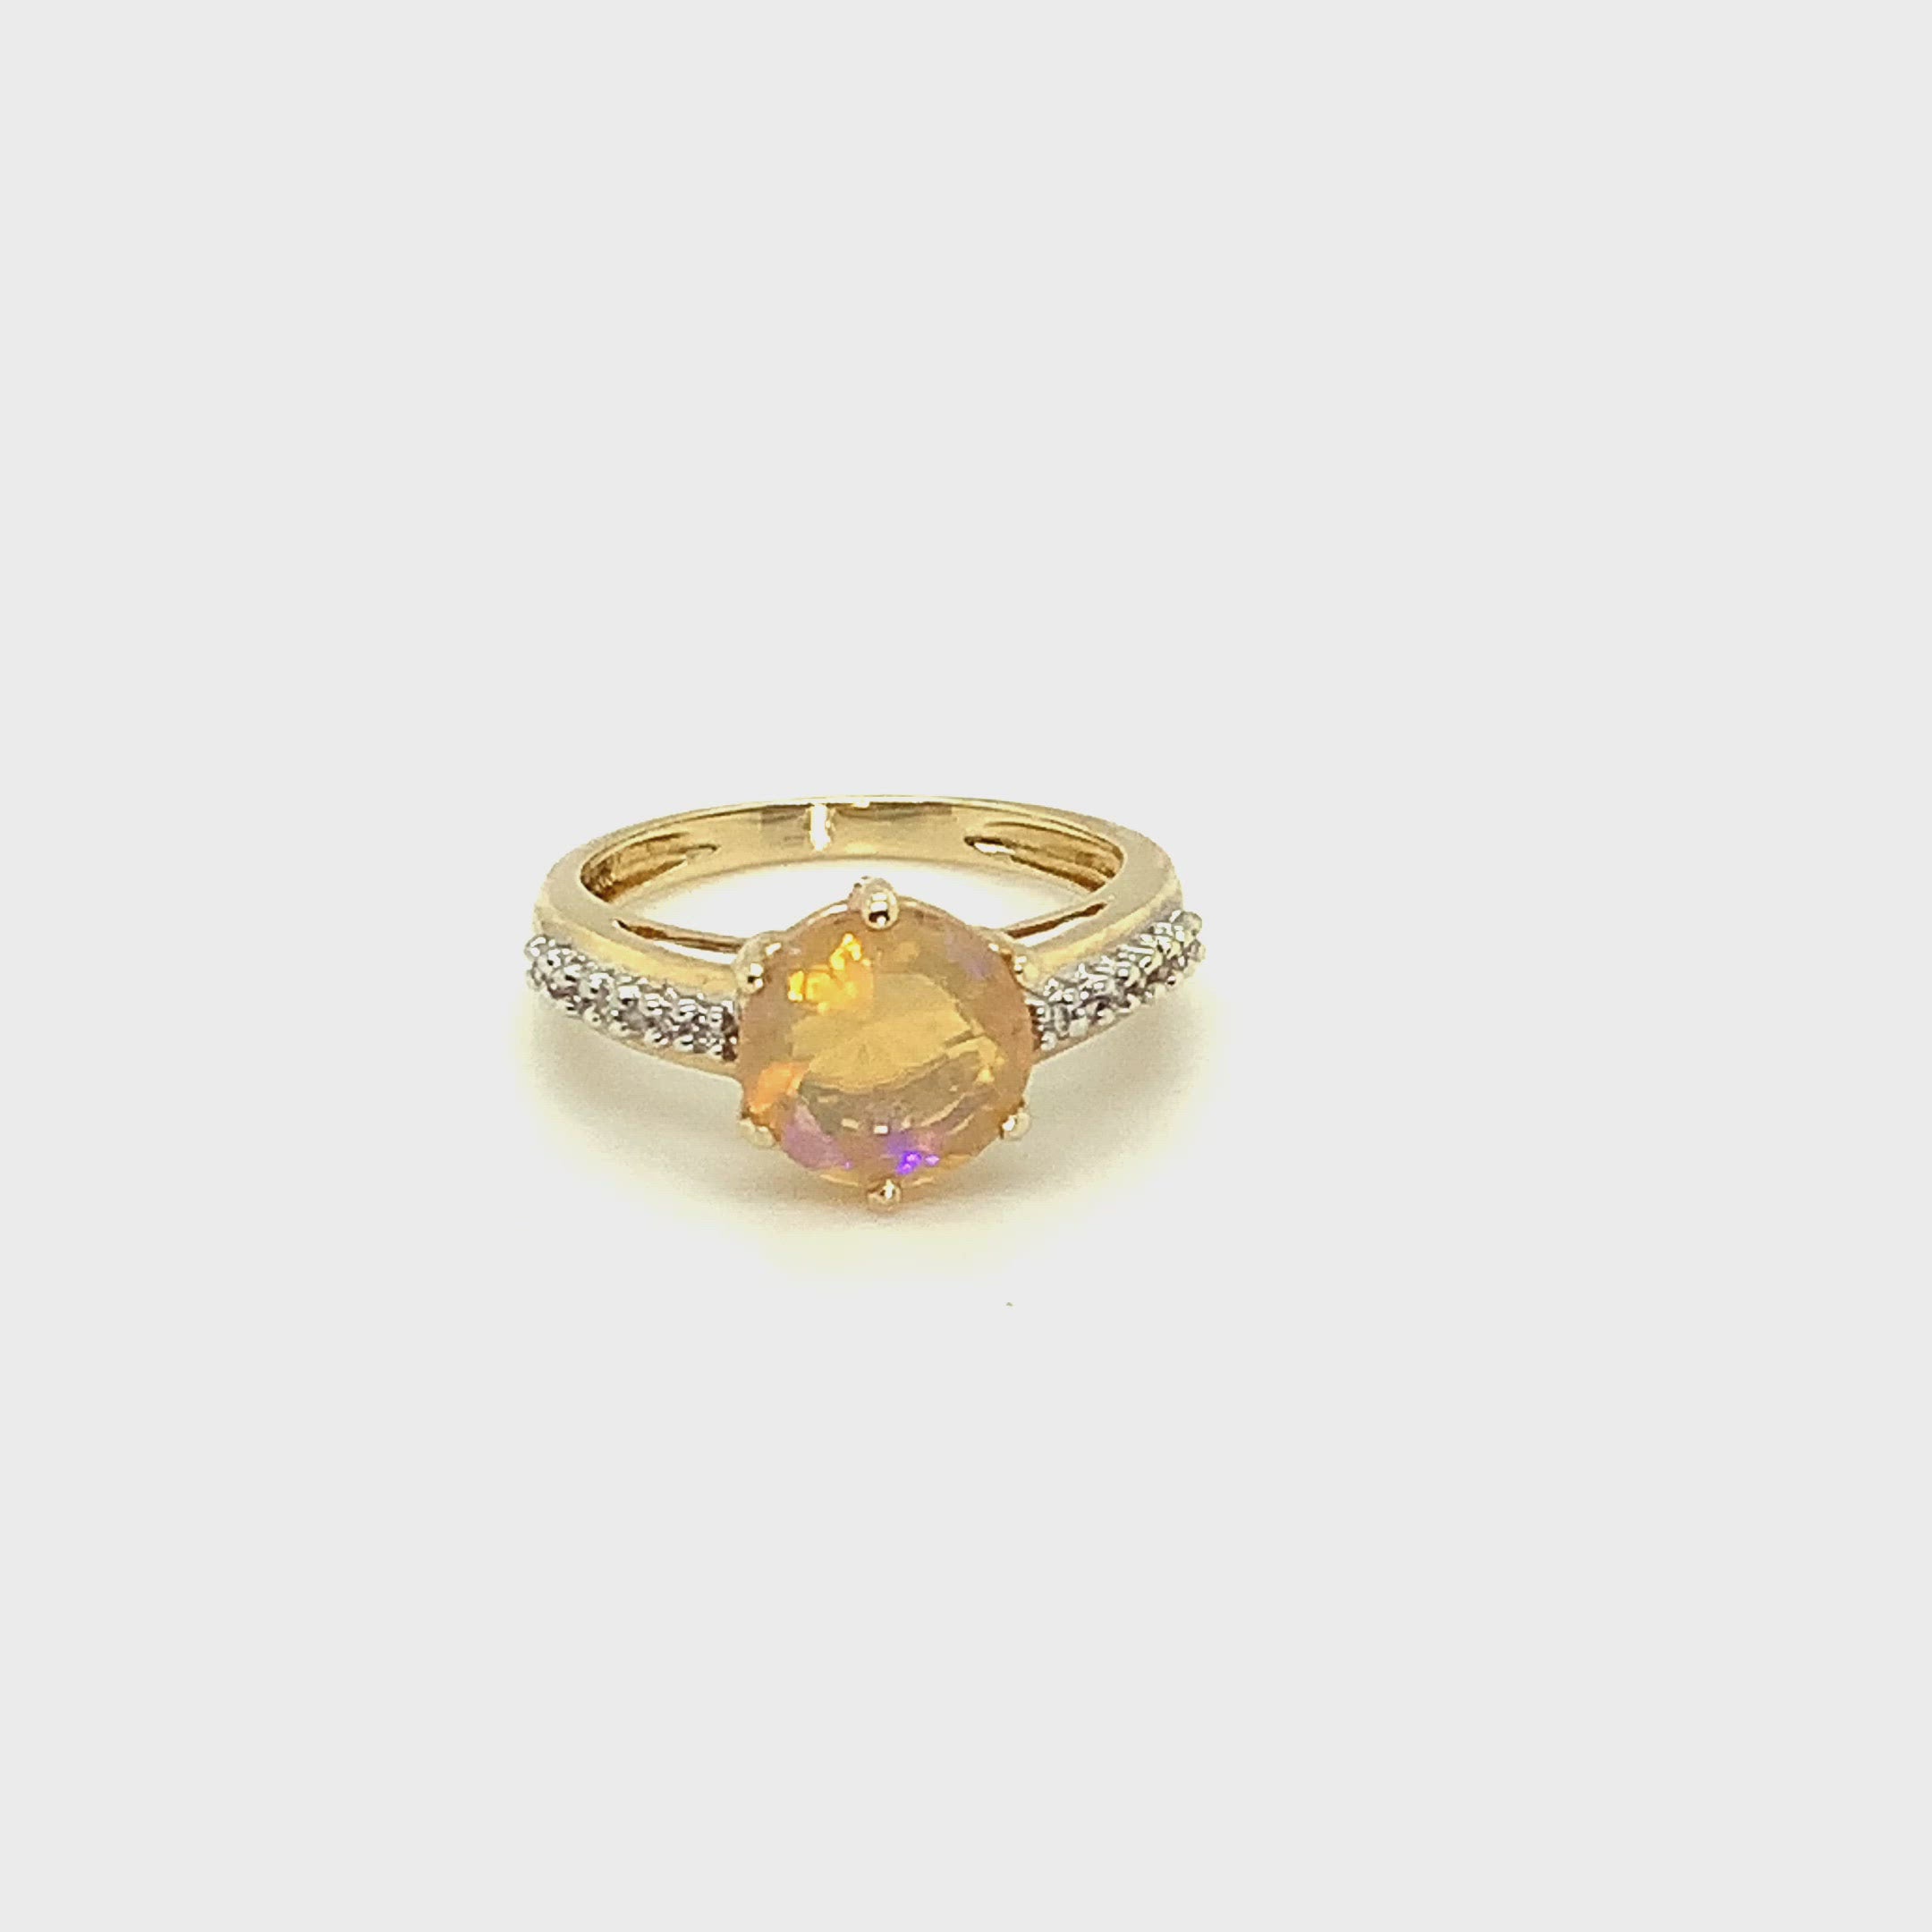 Natural Jelly Opal & Diamond Ring 14K Solid Gold 1.28tcw Gemstone Ring Women's Ring Birthstone Ring Engagement Ring Fine Jewelry Jewellery